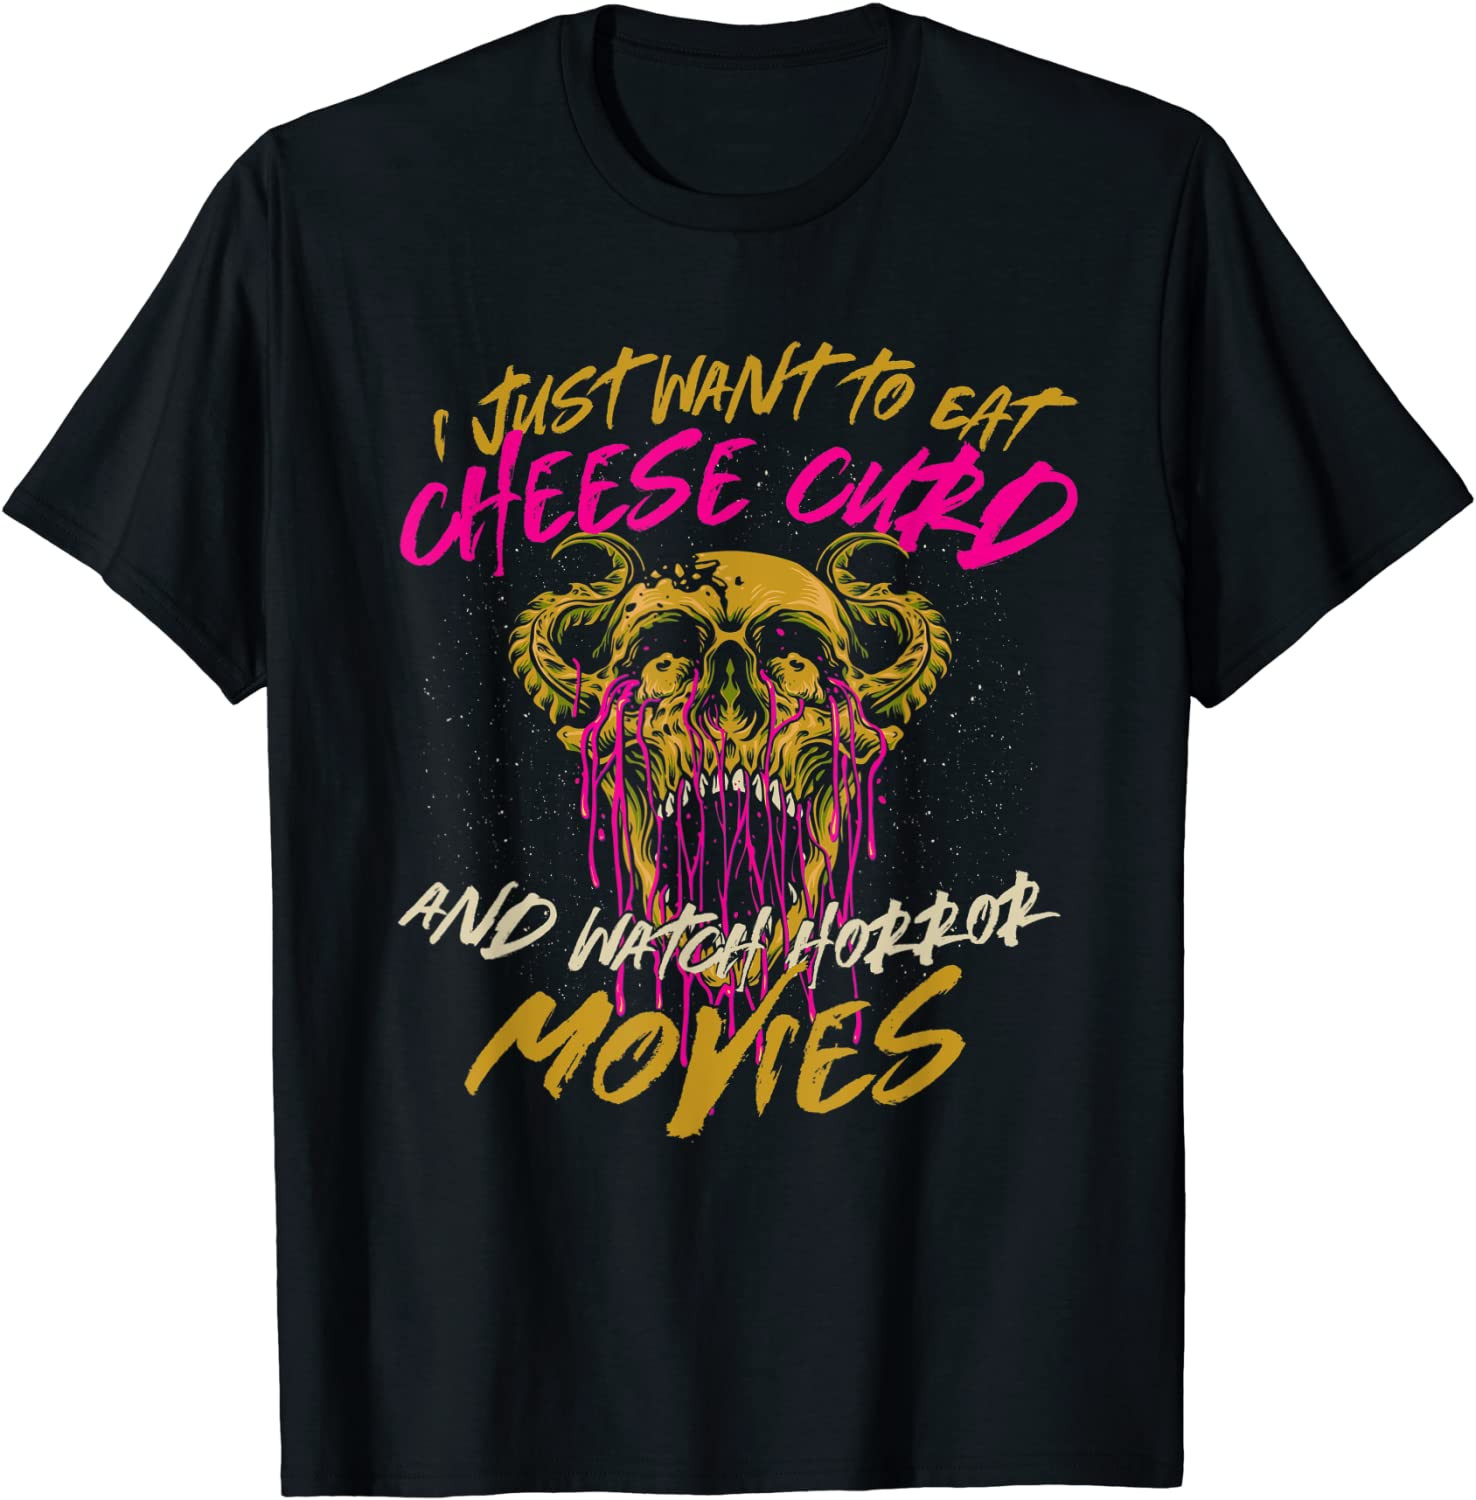 Eat Cheese Curd And Watch Horror Movies Comfort Food T-Shirt